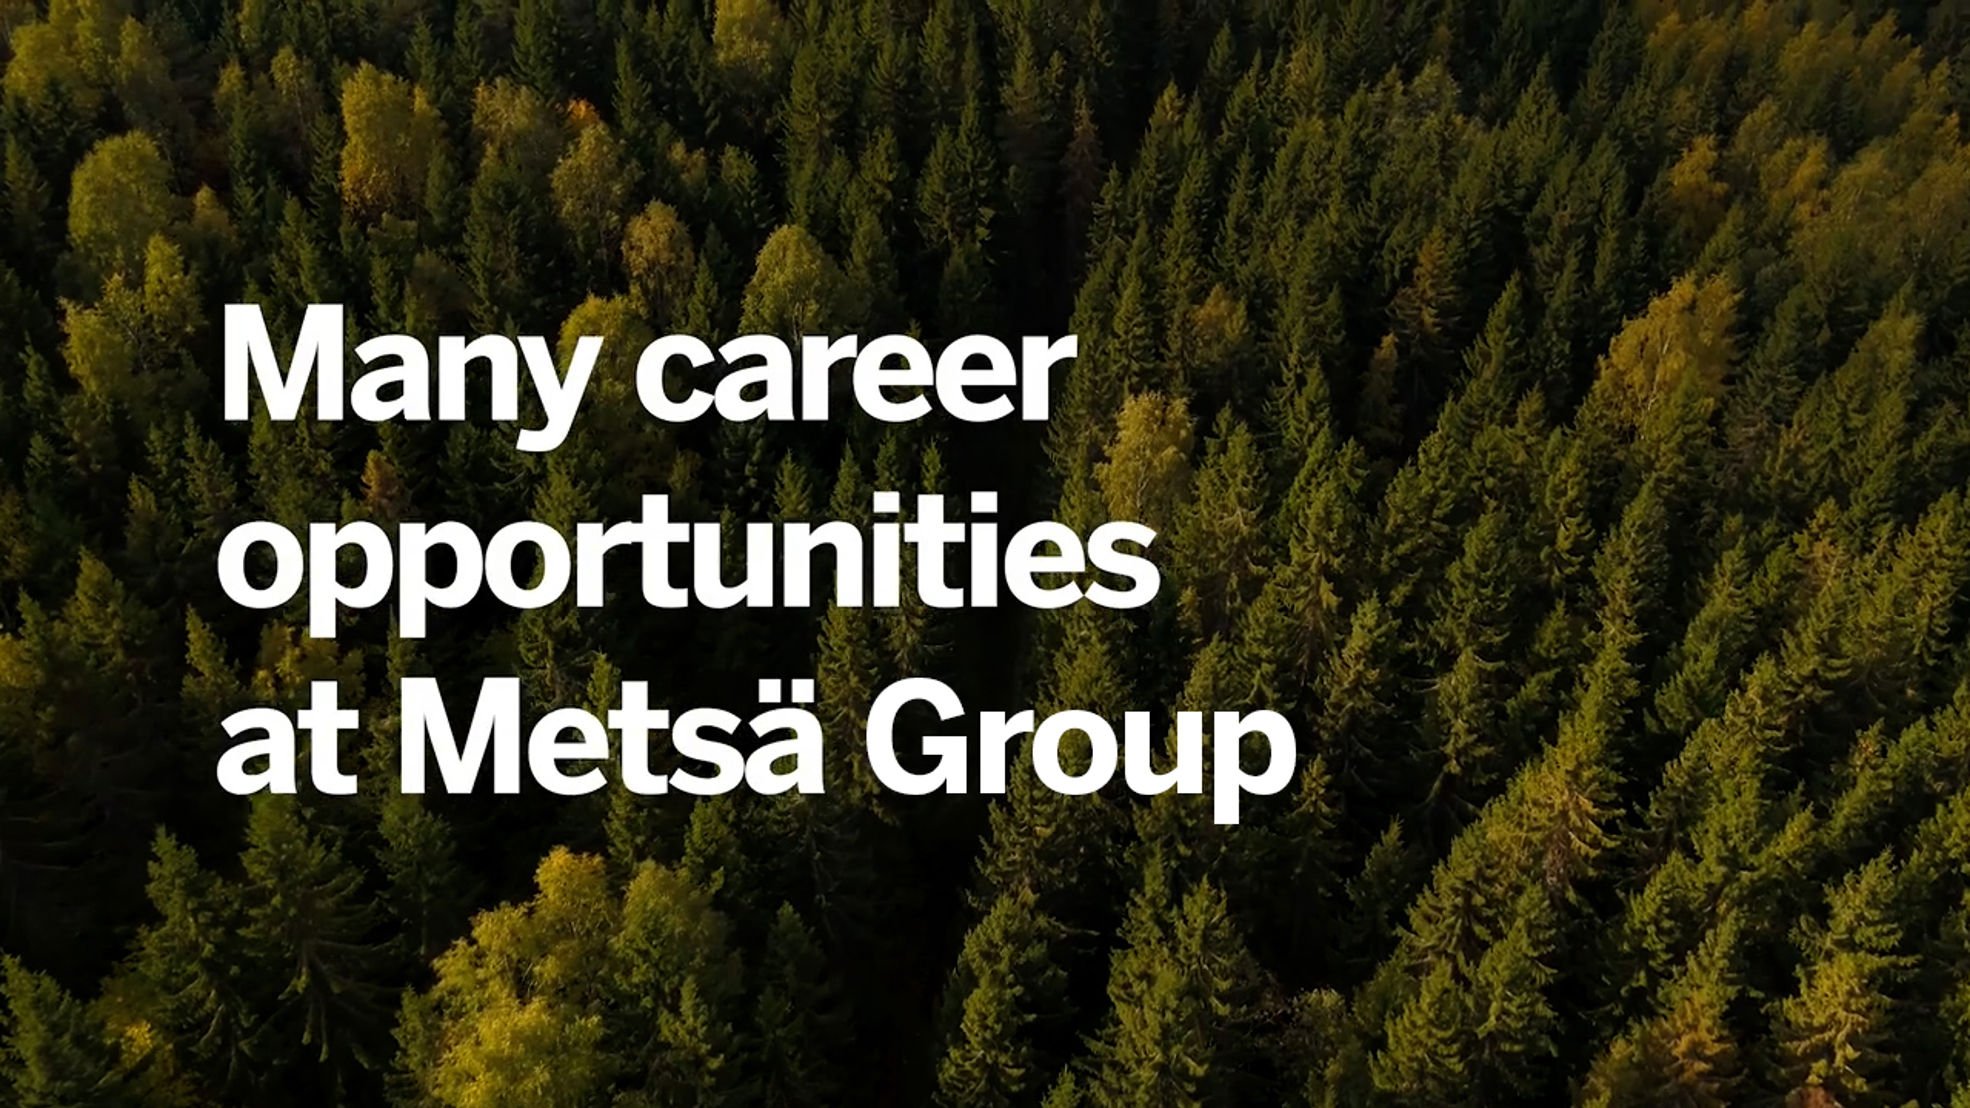 Many career opportunities at Metsä